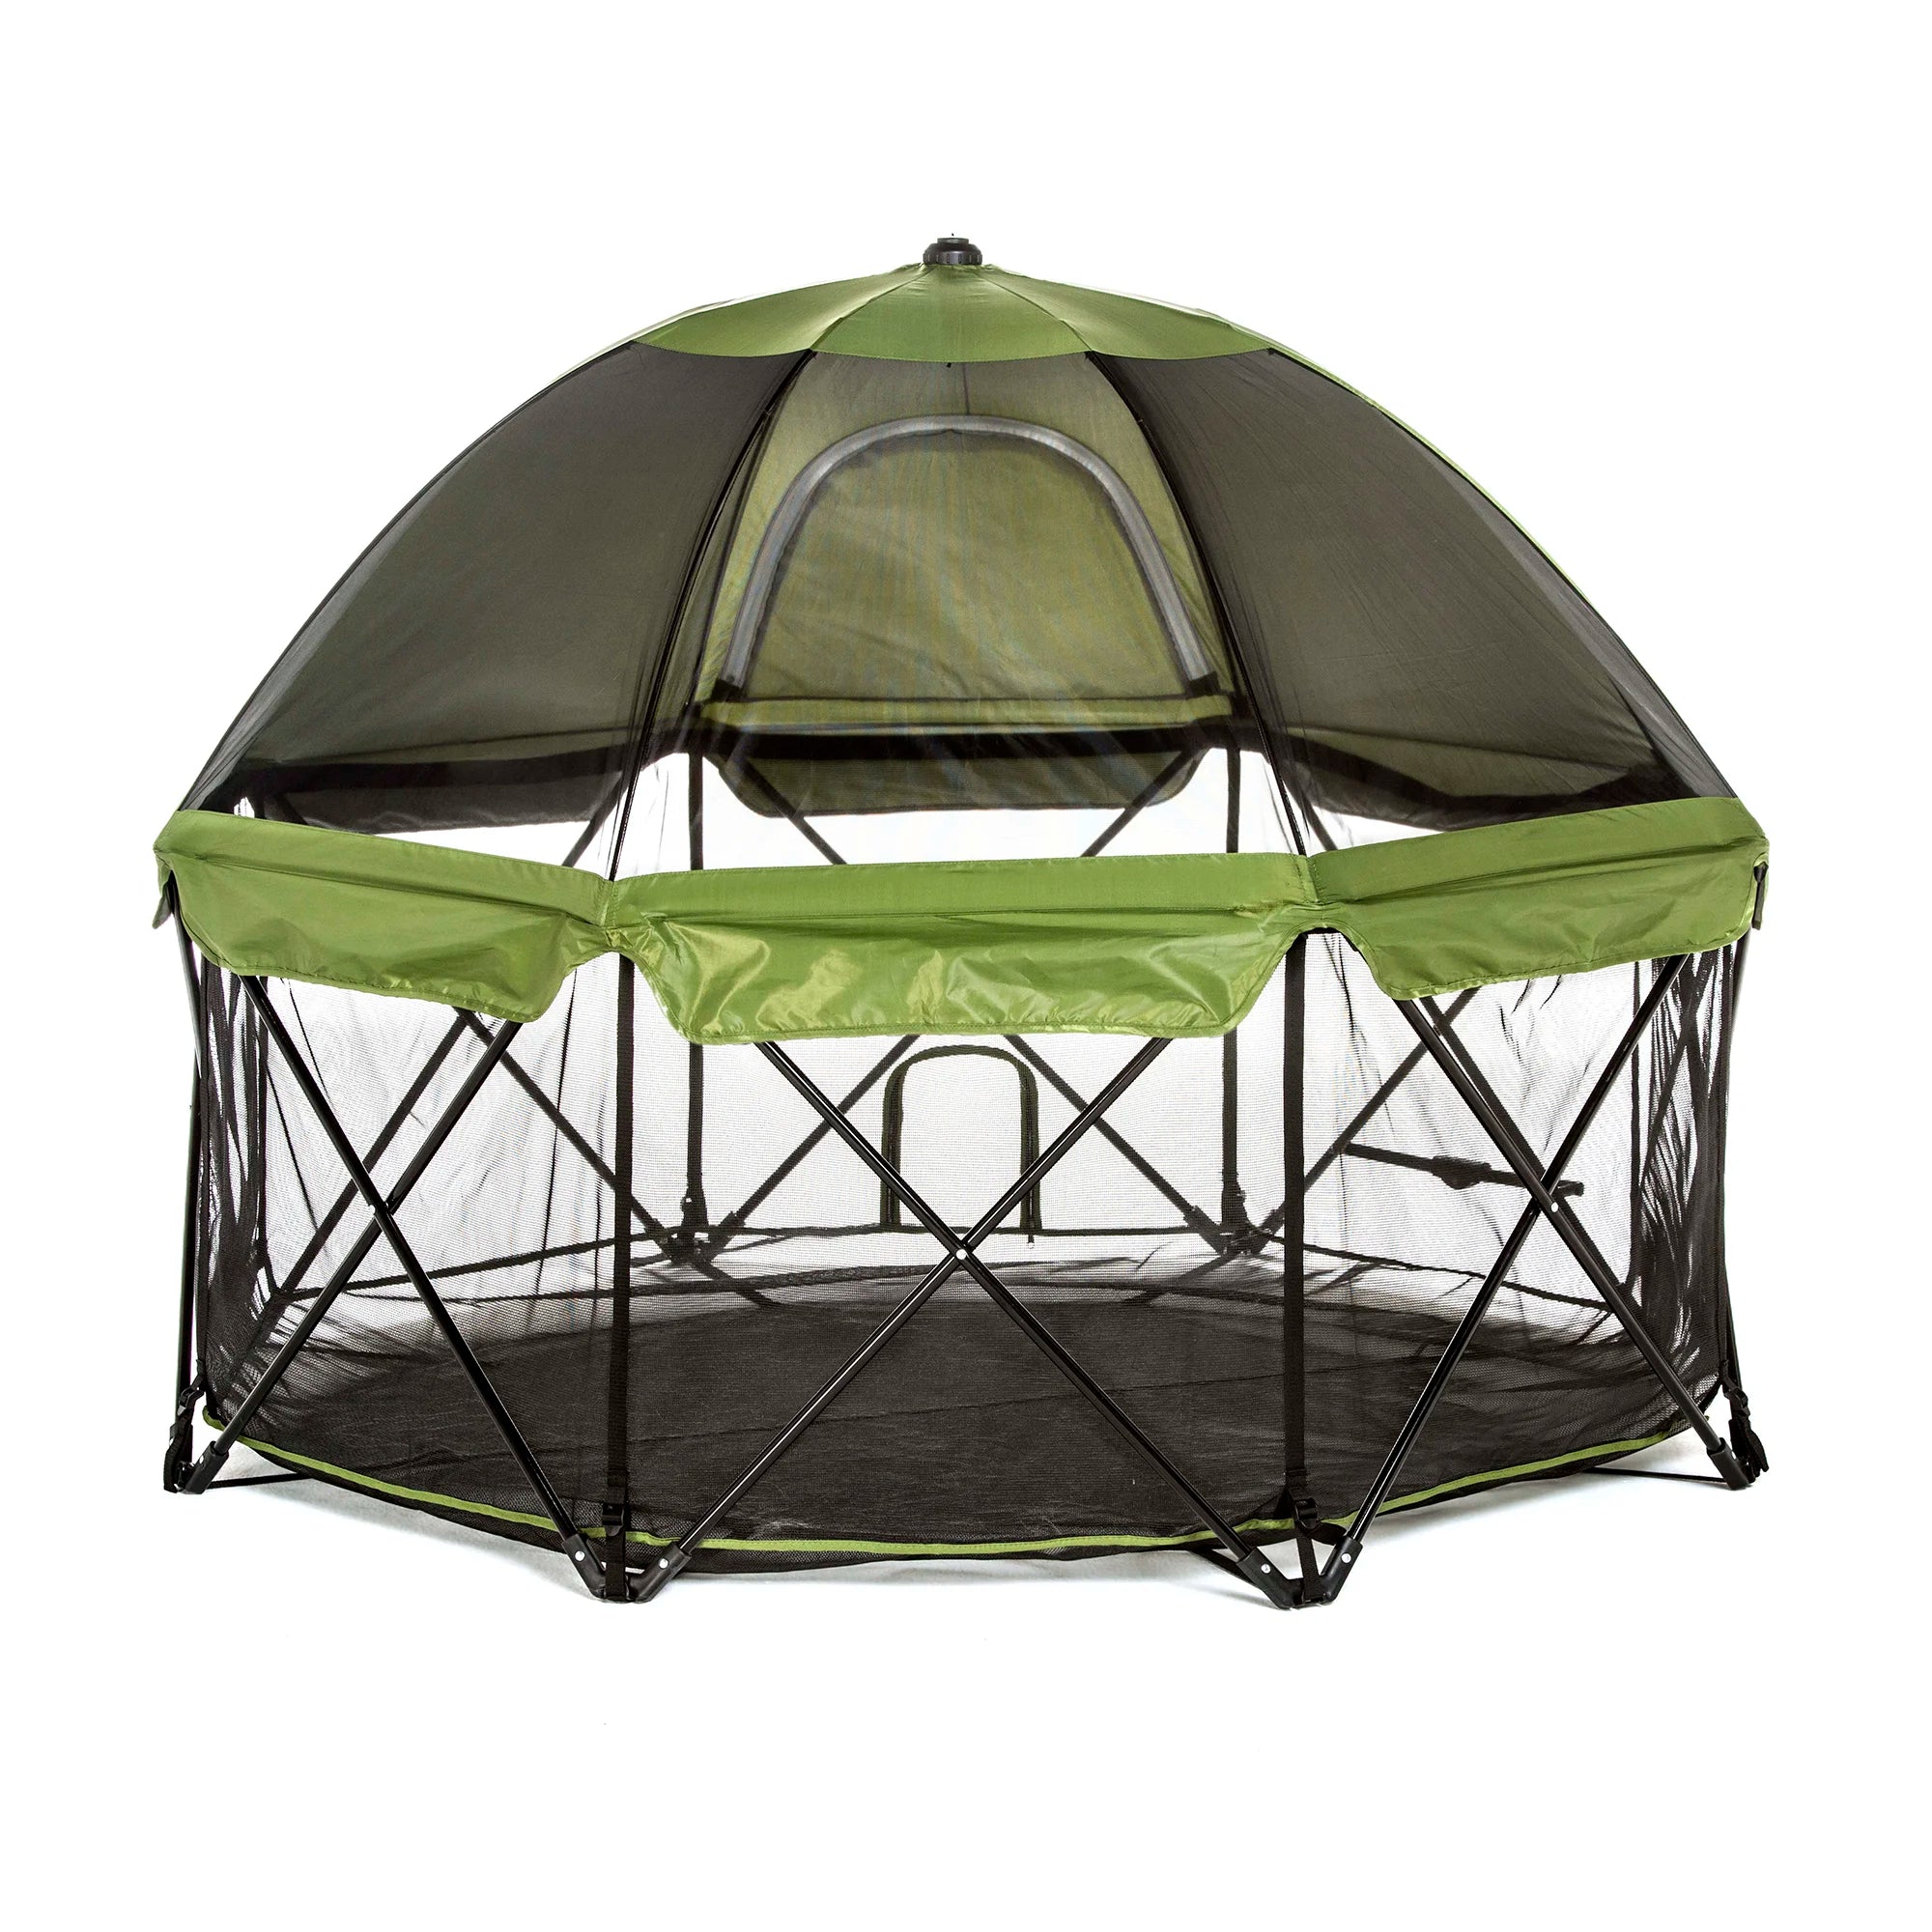 The Portable Pet Pen with Canopy on a white background.